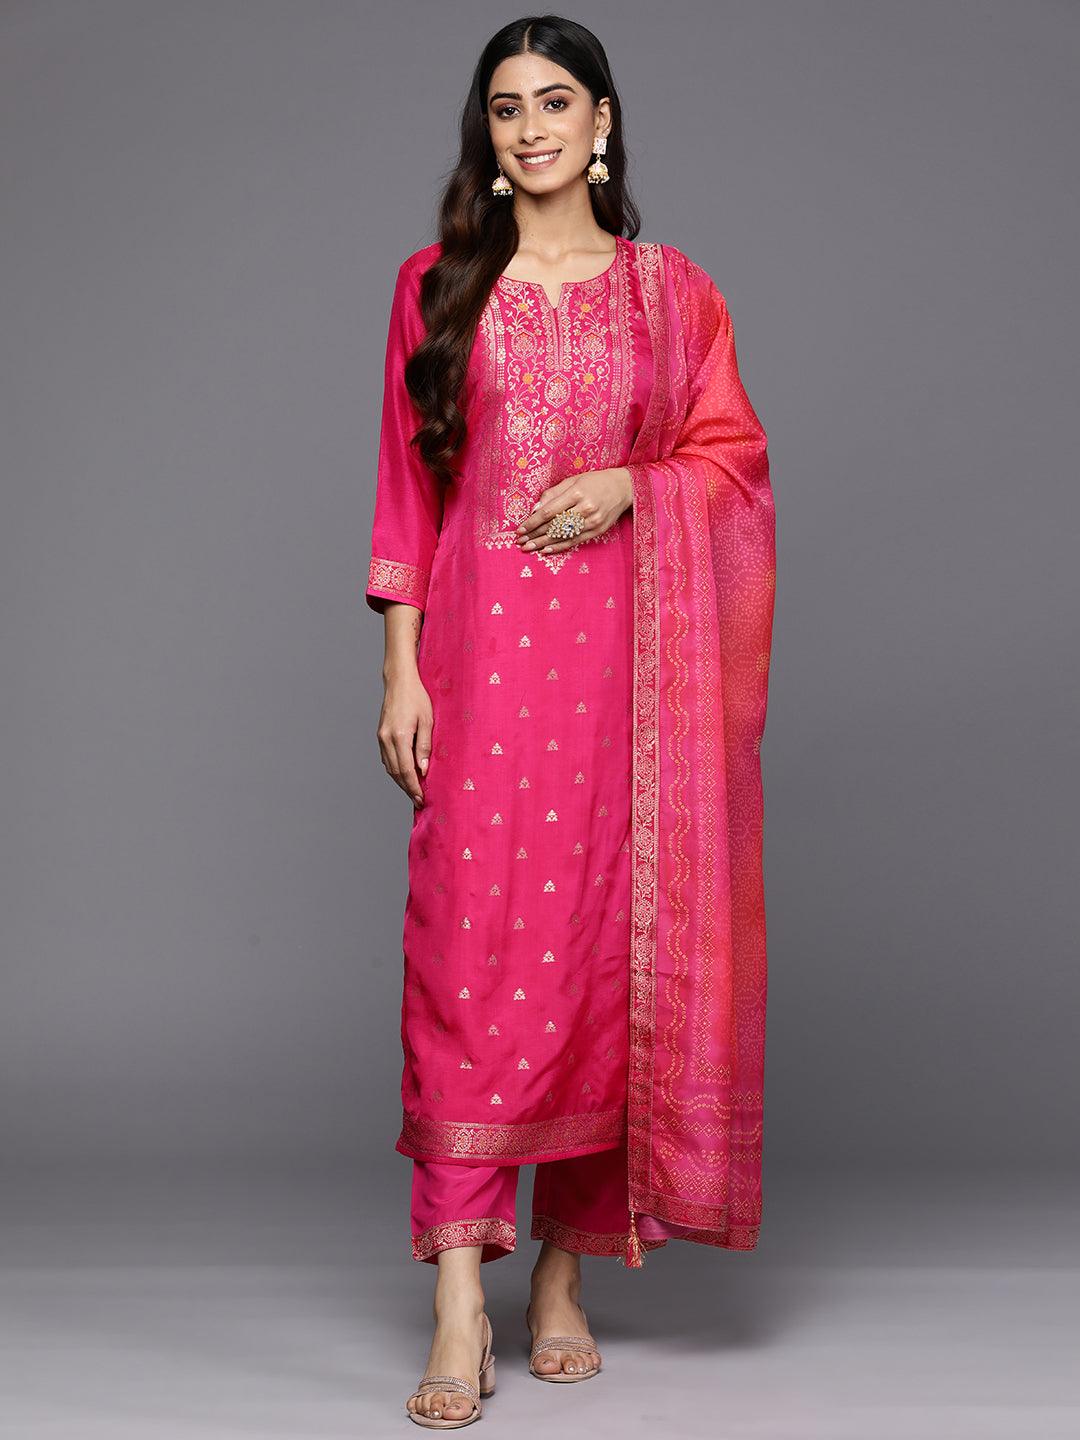 Magenta Self Design Silk Blend Straight Suit Set With Trousers - Libas